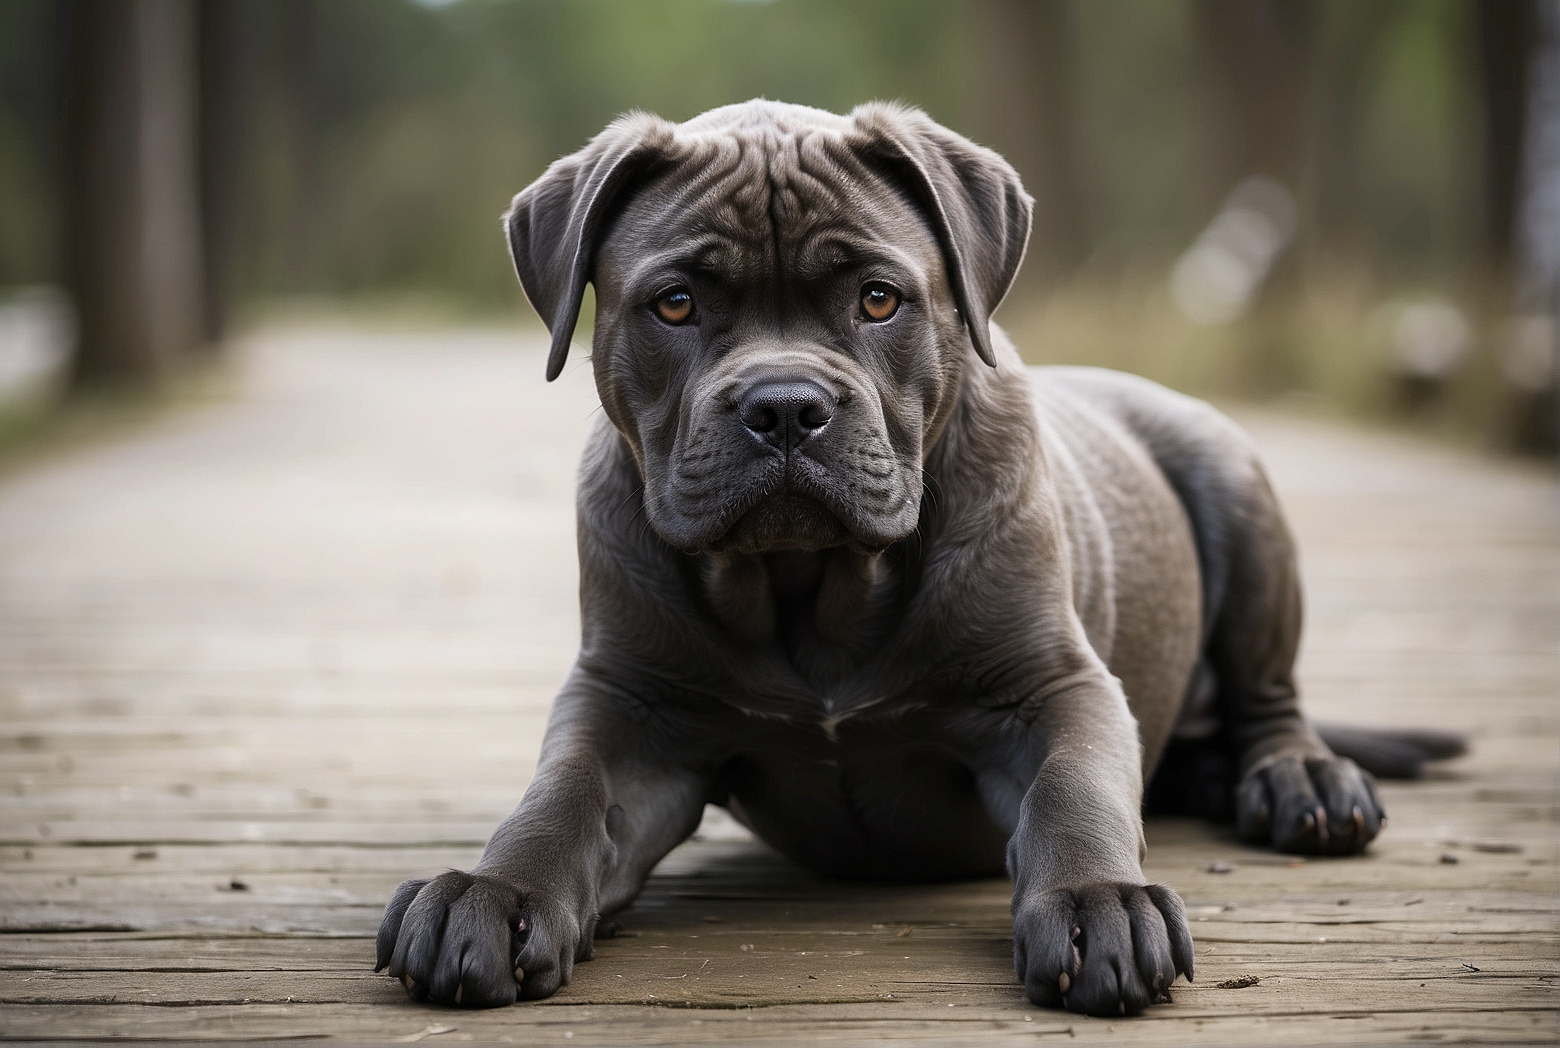 Why is my Cane Corso smaller than usual?